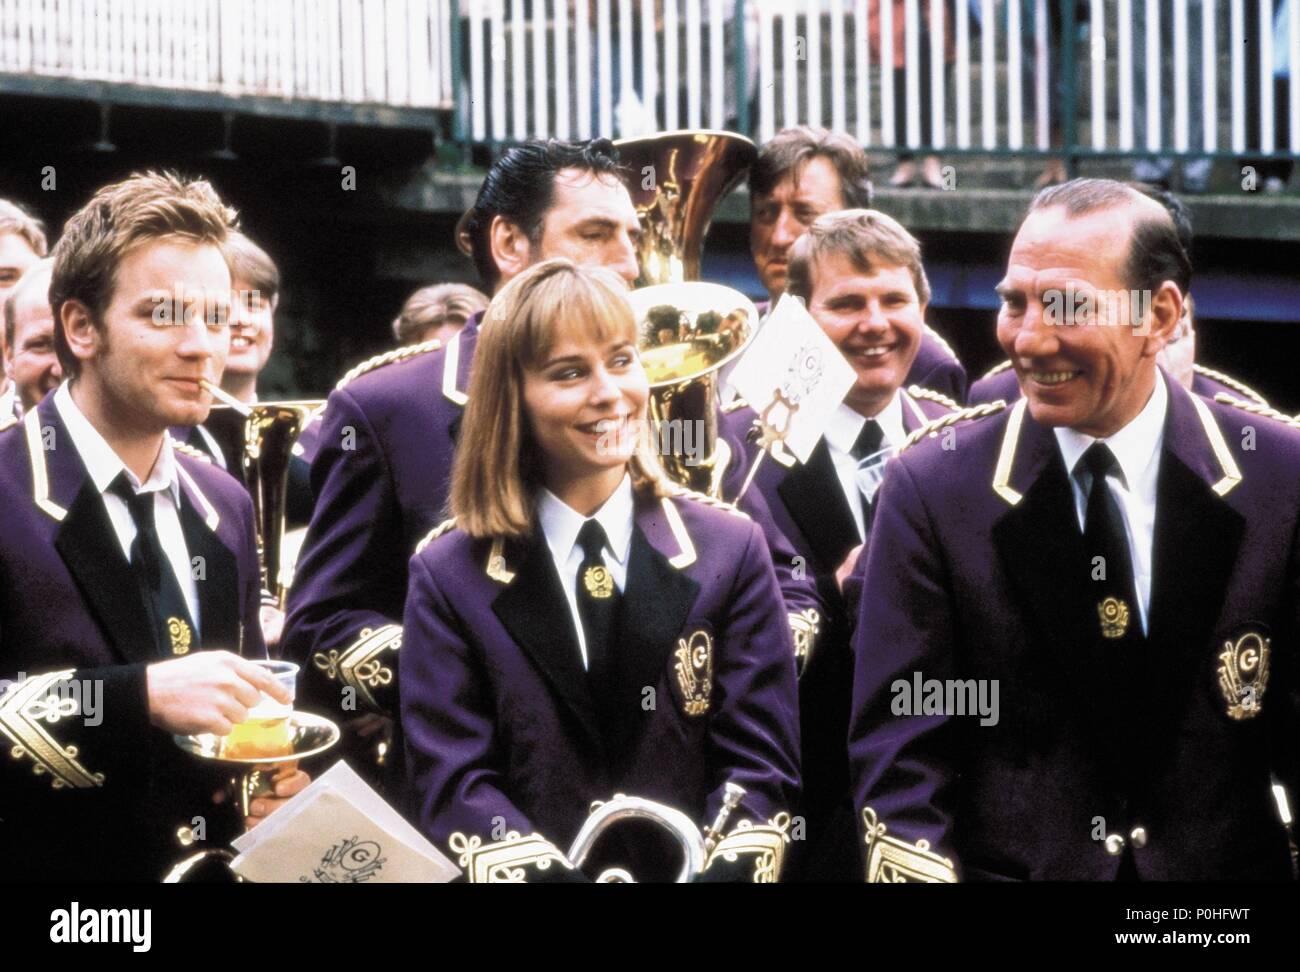 Original Film Title: BRASSED OFF.  English Title: BRASSED OFF.  Film Director: MARK HERMAN.  Year: 1996.  Stars: PETE POSTLETHWAITE; EWAN MCGREGOR; TARA FITZGERALD. Copyright: Editorial inside use only. This is a publicly distributed handout. Access rights only, no license of copyright provided. Mandatory authorization to Visual Icon (www.visual-icon.com) is required for the reproduction of this image. Credit: MIRAMAX / Album Stock Photo